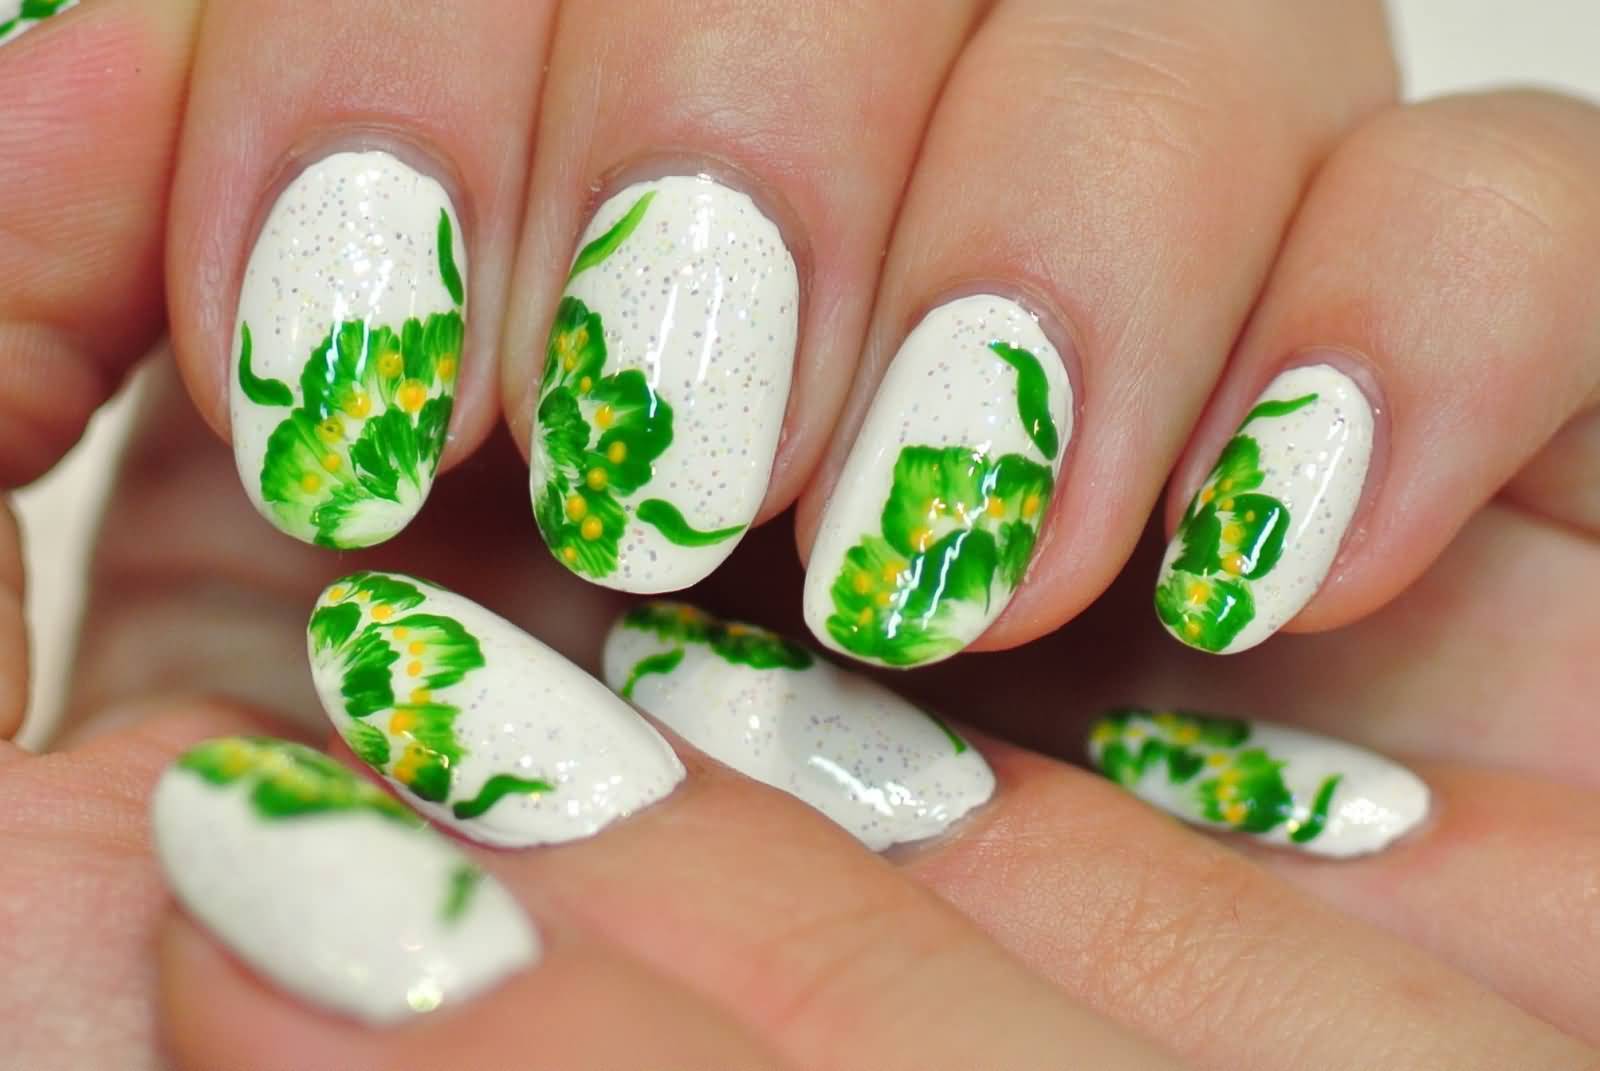 9. Nail Art Design Ideas for Every Occasion - wide 1